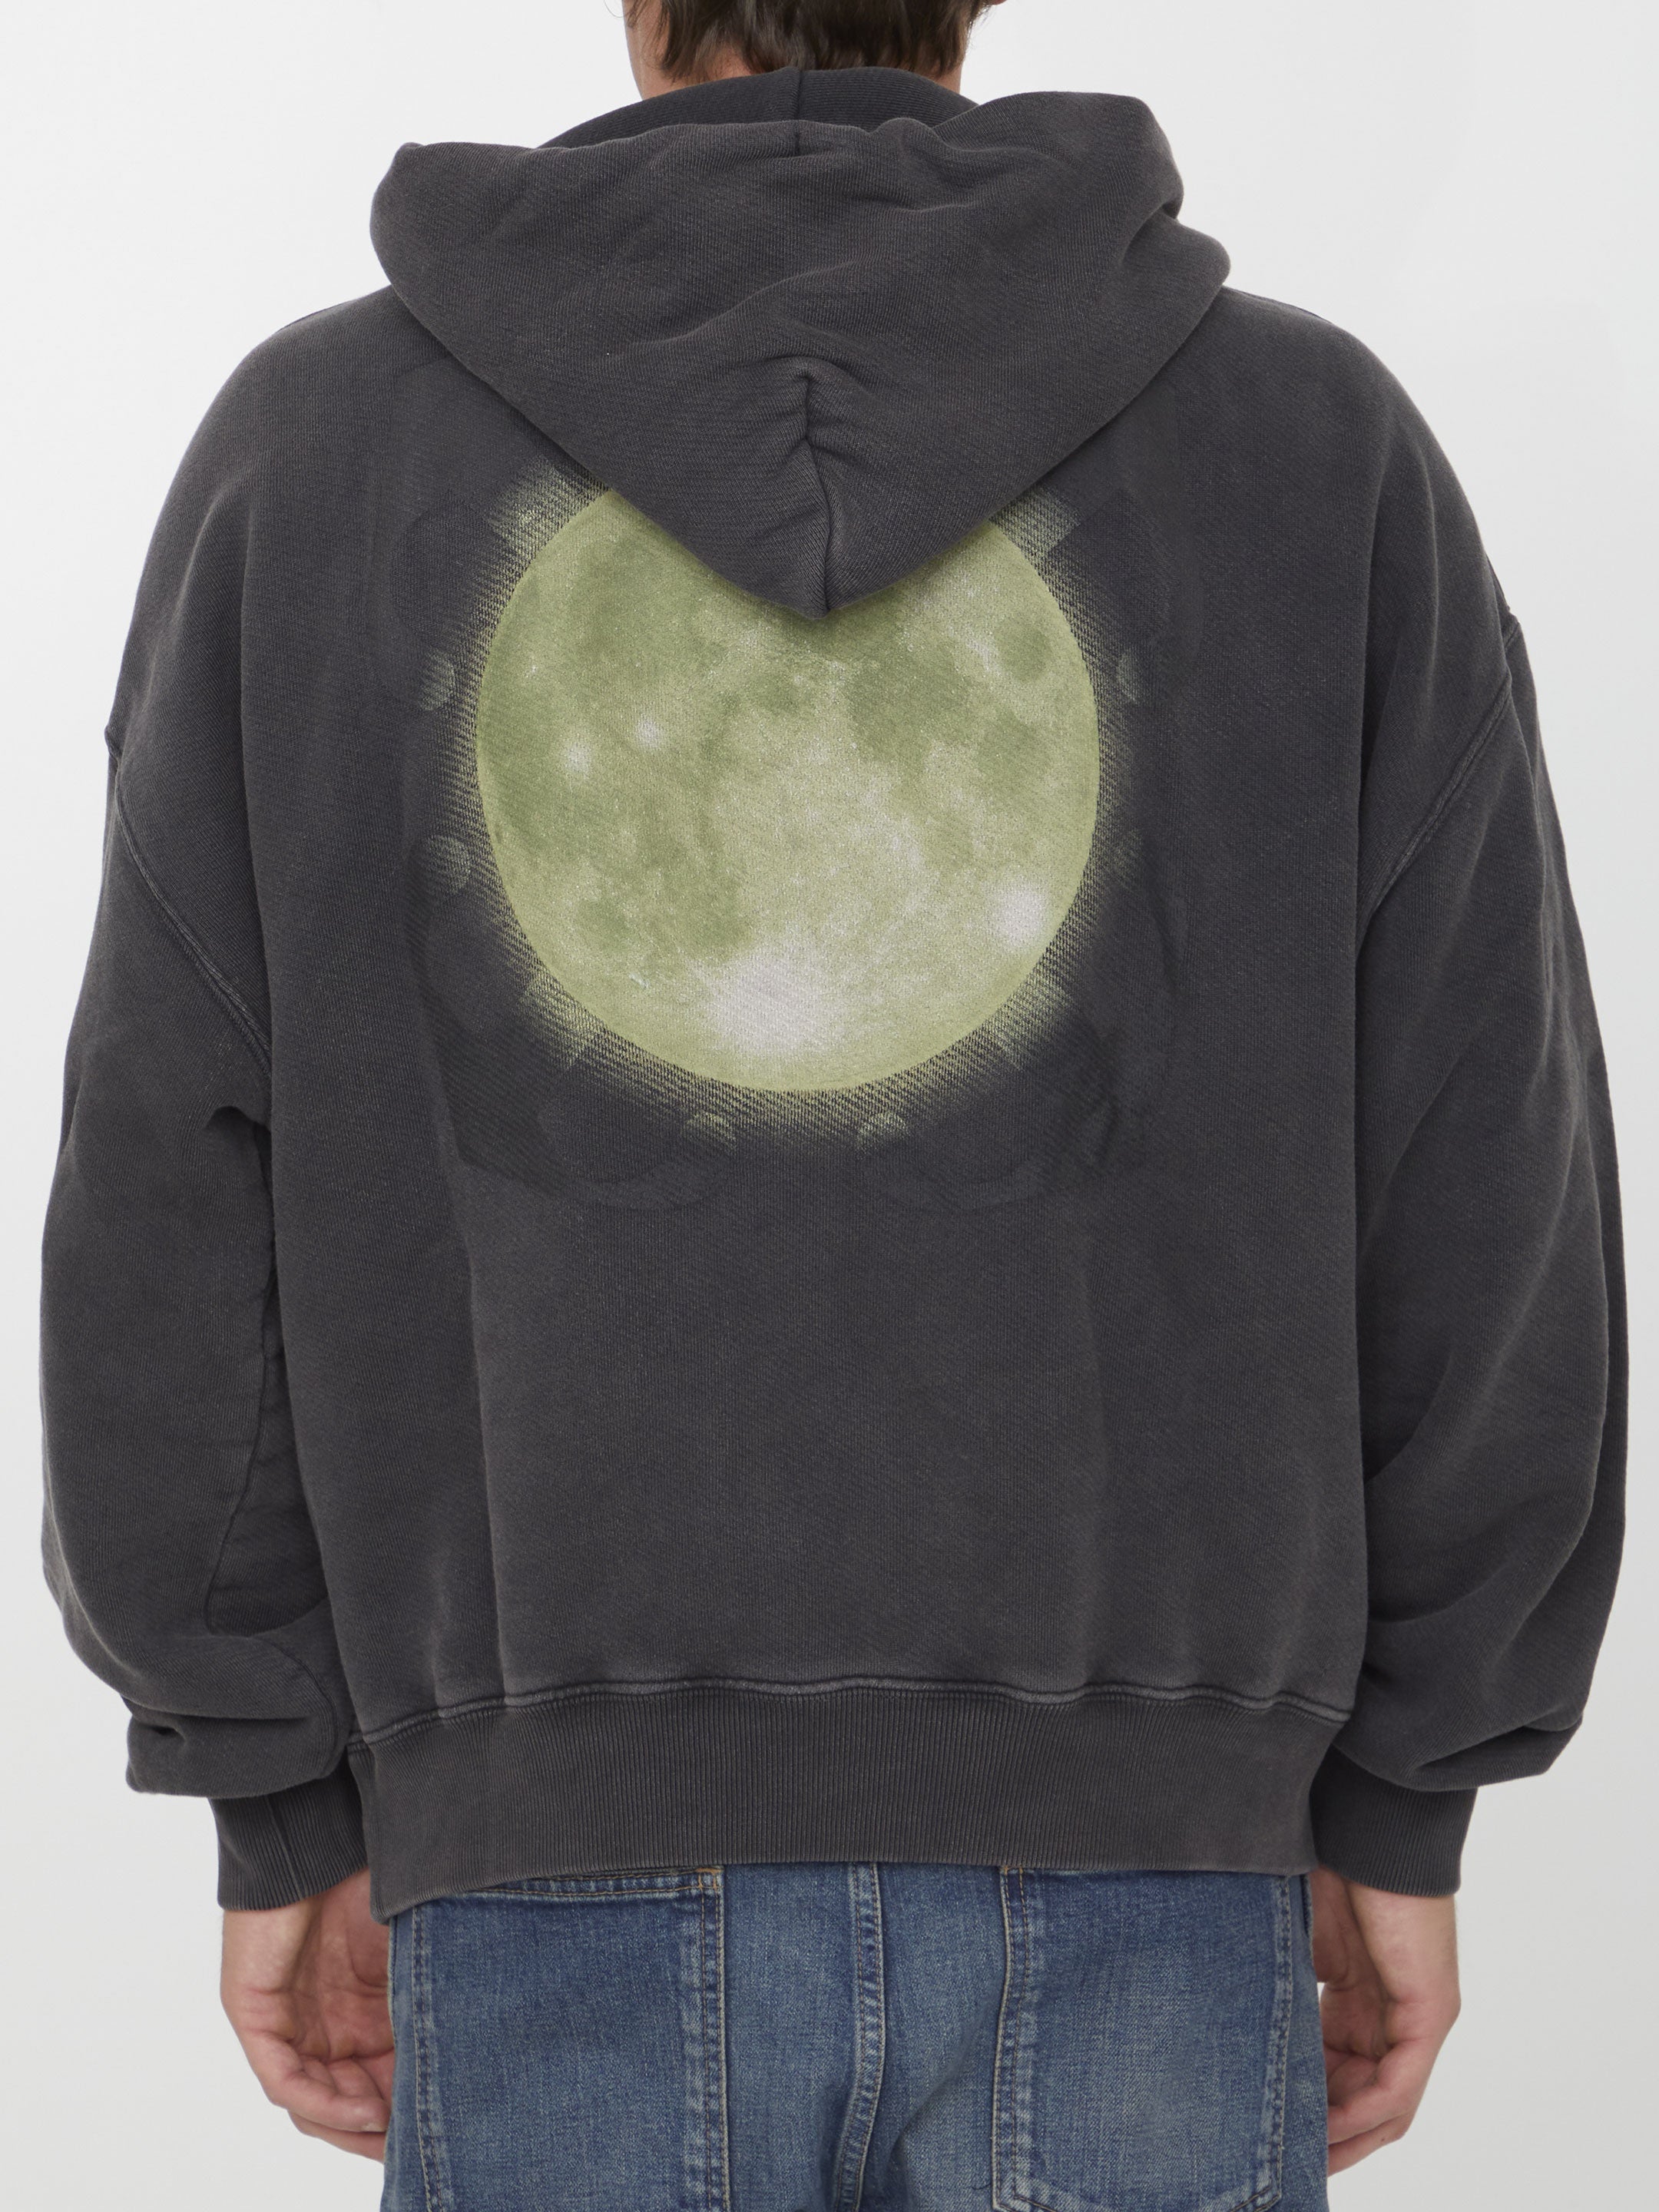 OFF-WHITE-OUTLET-SALE-Super-Moon-hoodie-Strick-XS-BLACK-ARCHIVE-COLLECTION-4.jpg